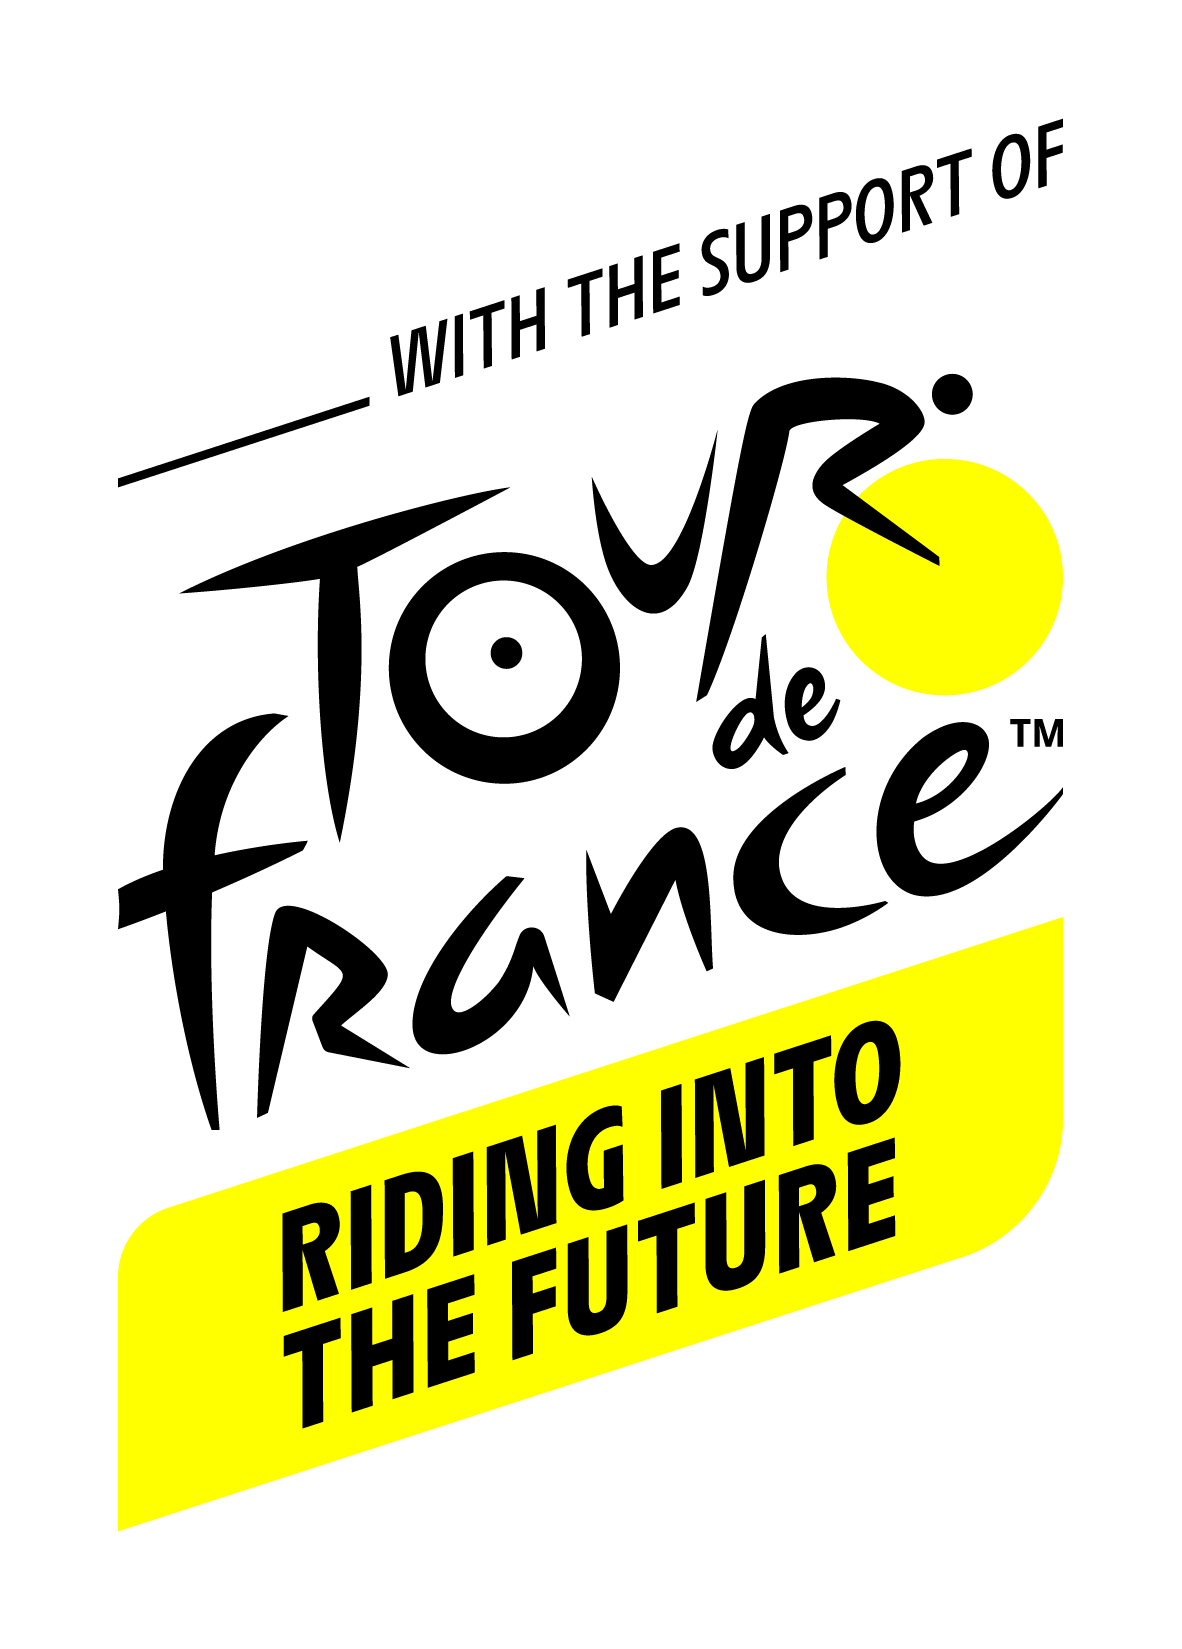 TDF-With_the_support-Riding_into_the_future-Logo-Reversed-Light_background-RGB.png